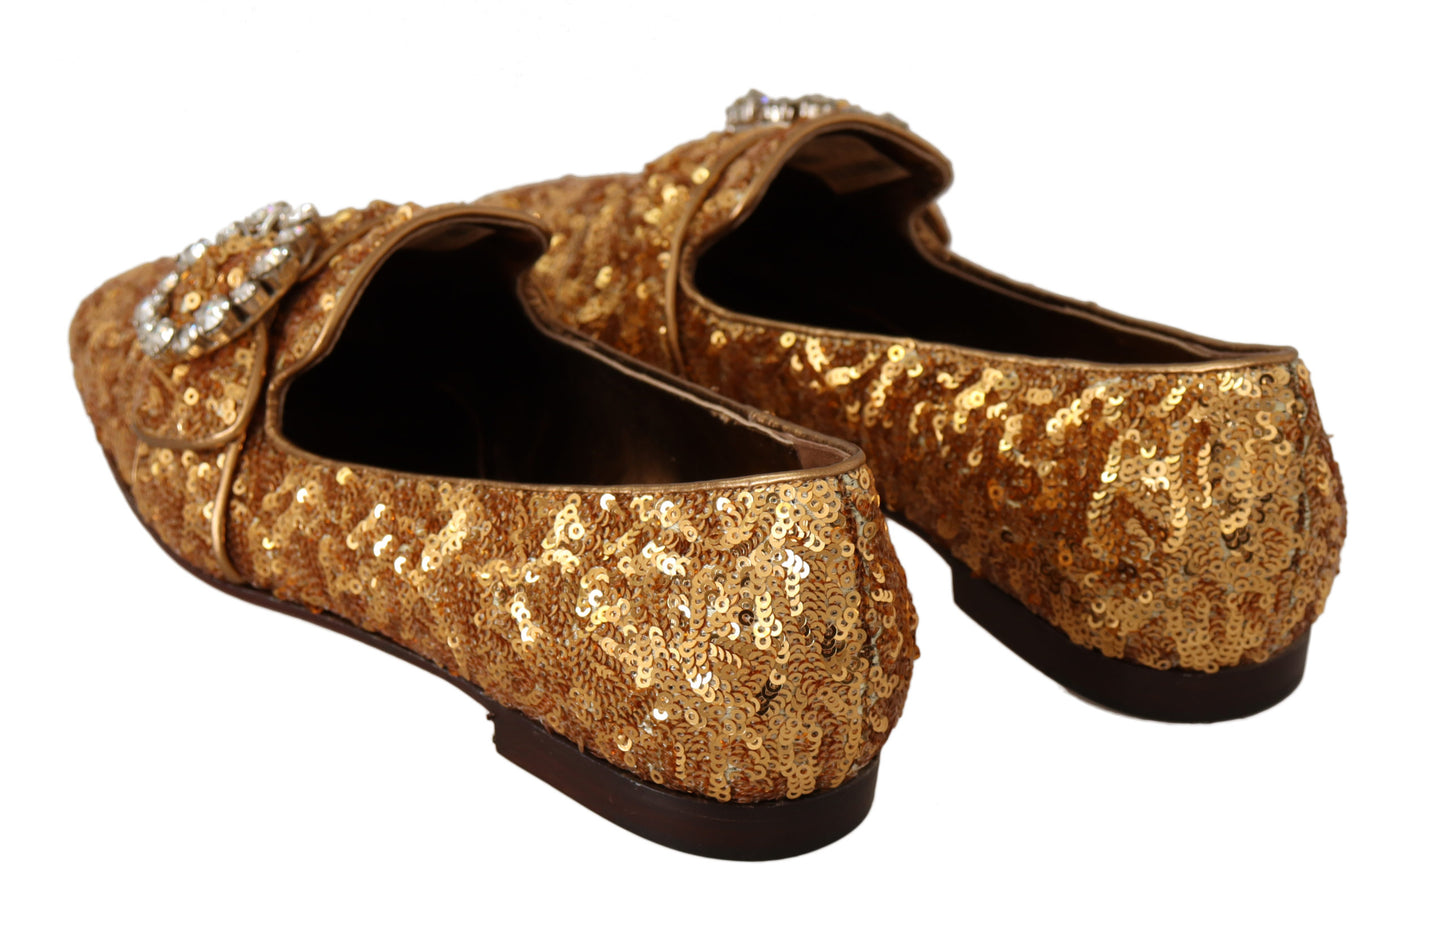 Gold Sequin Crystal Flat Women Loafers Shoes